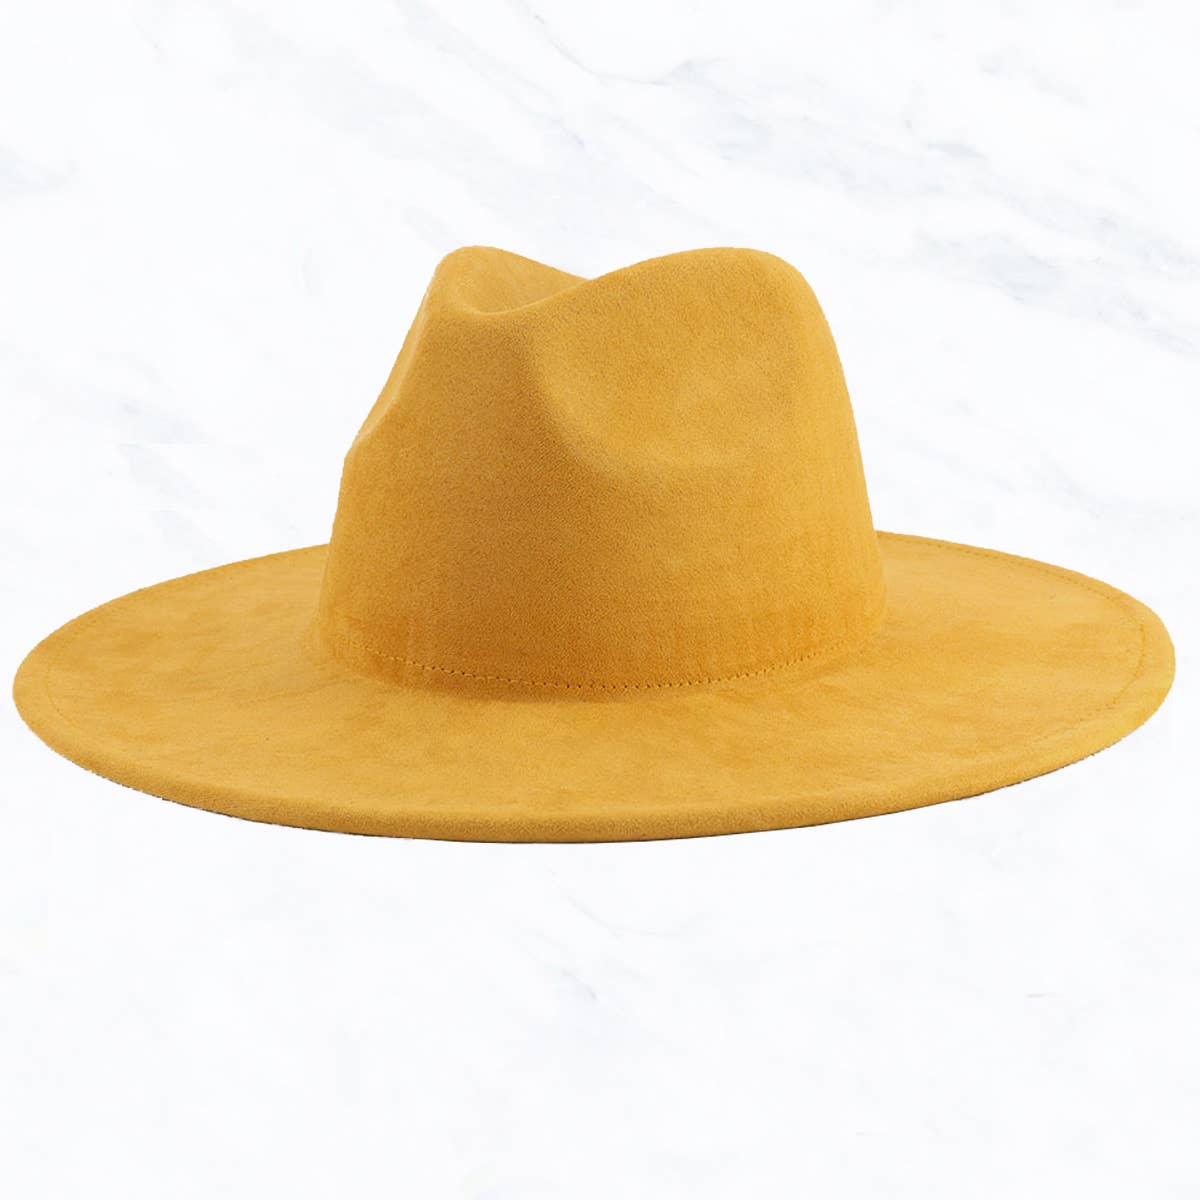 Suzie Q USA - Suede Large Eaves Peach Top Fedora Hat: Brown